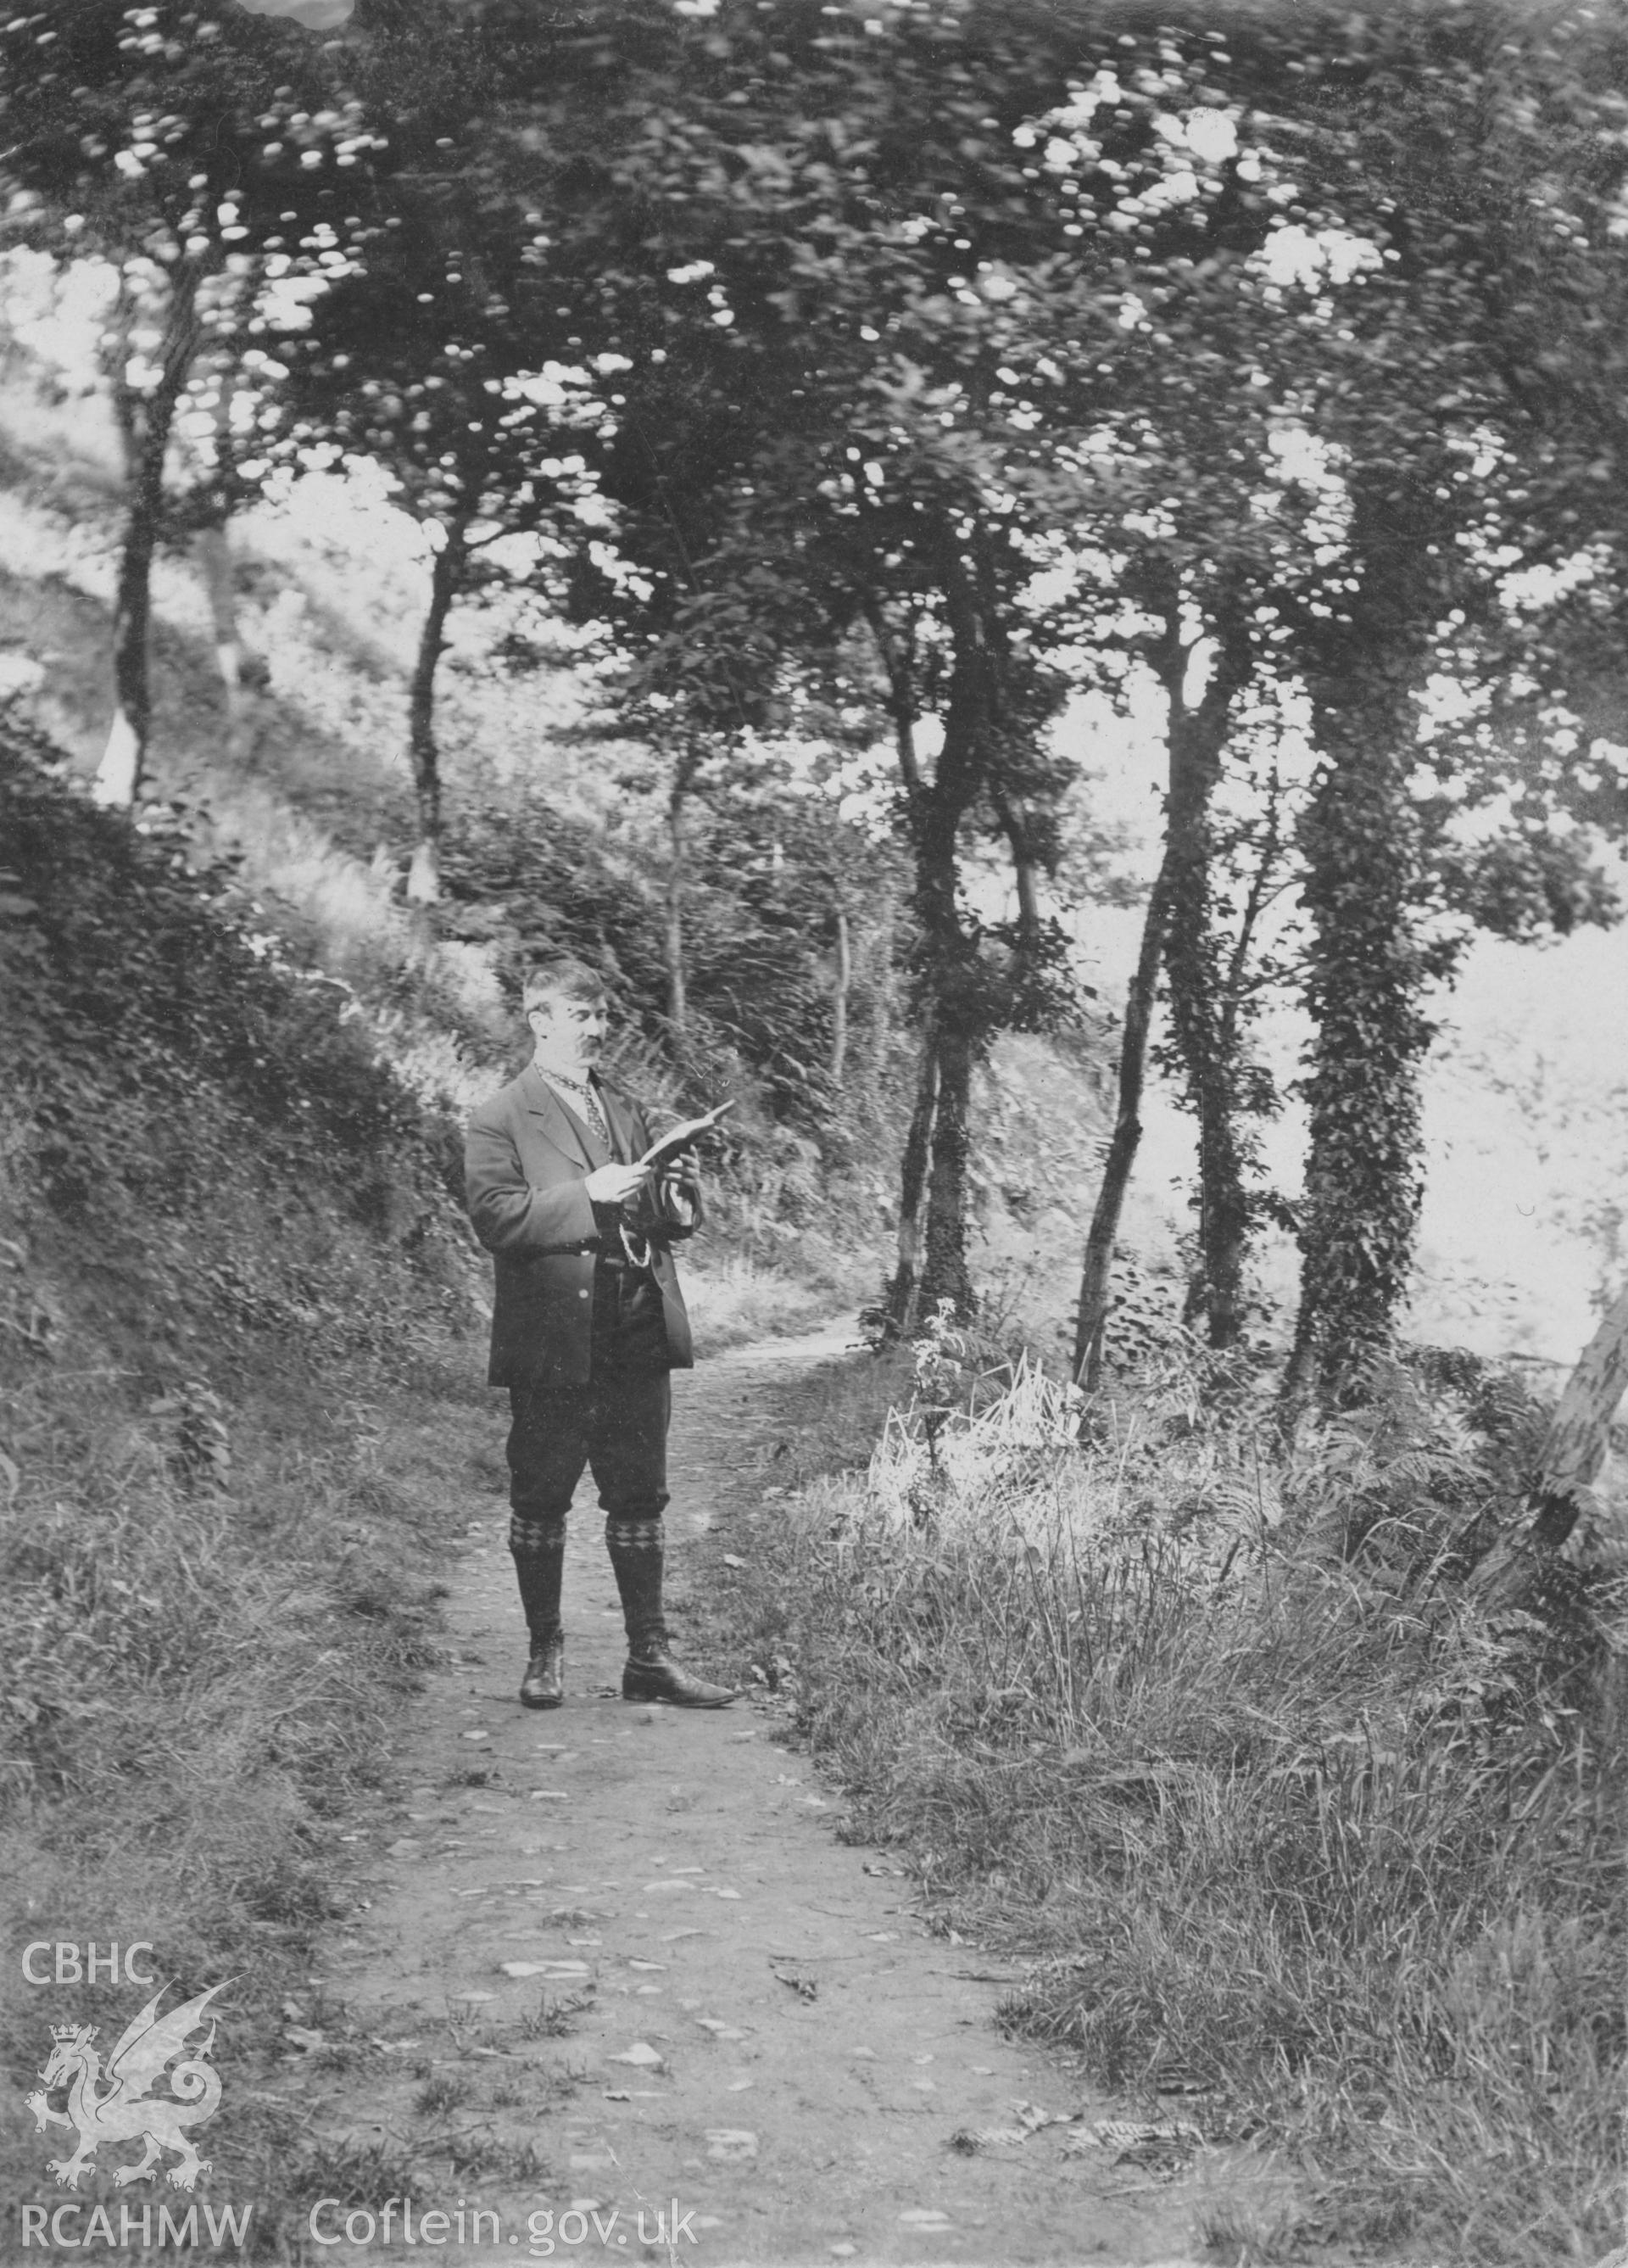 "By Llanelly Reservoir 1906". Photo of a standing figure.  Digitised from a photograph album showing views of Aberystwyth and District, produced by David John Saer, school teacher of Aberystwyth. Loaned for copying by Dr Alan Chamberlain.